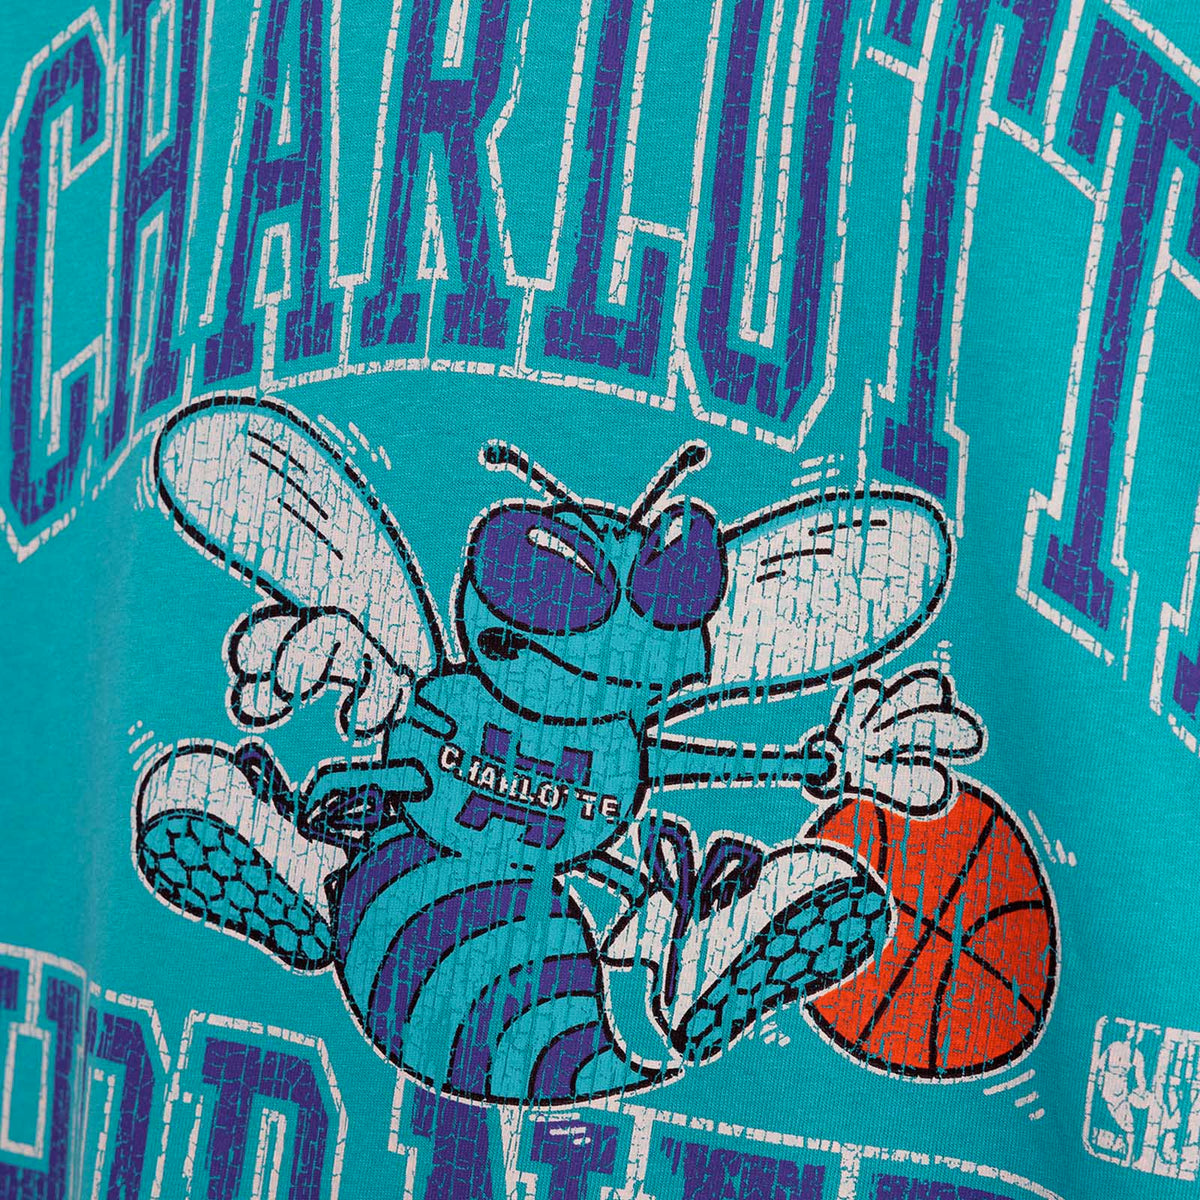 Charlotte Hornets Vintage HWC Ivy Arch Tee - Faded Teal